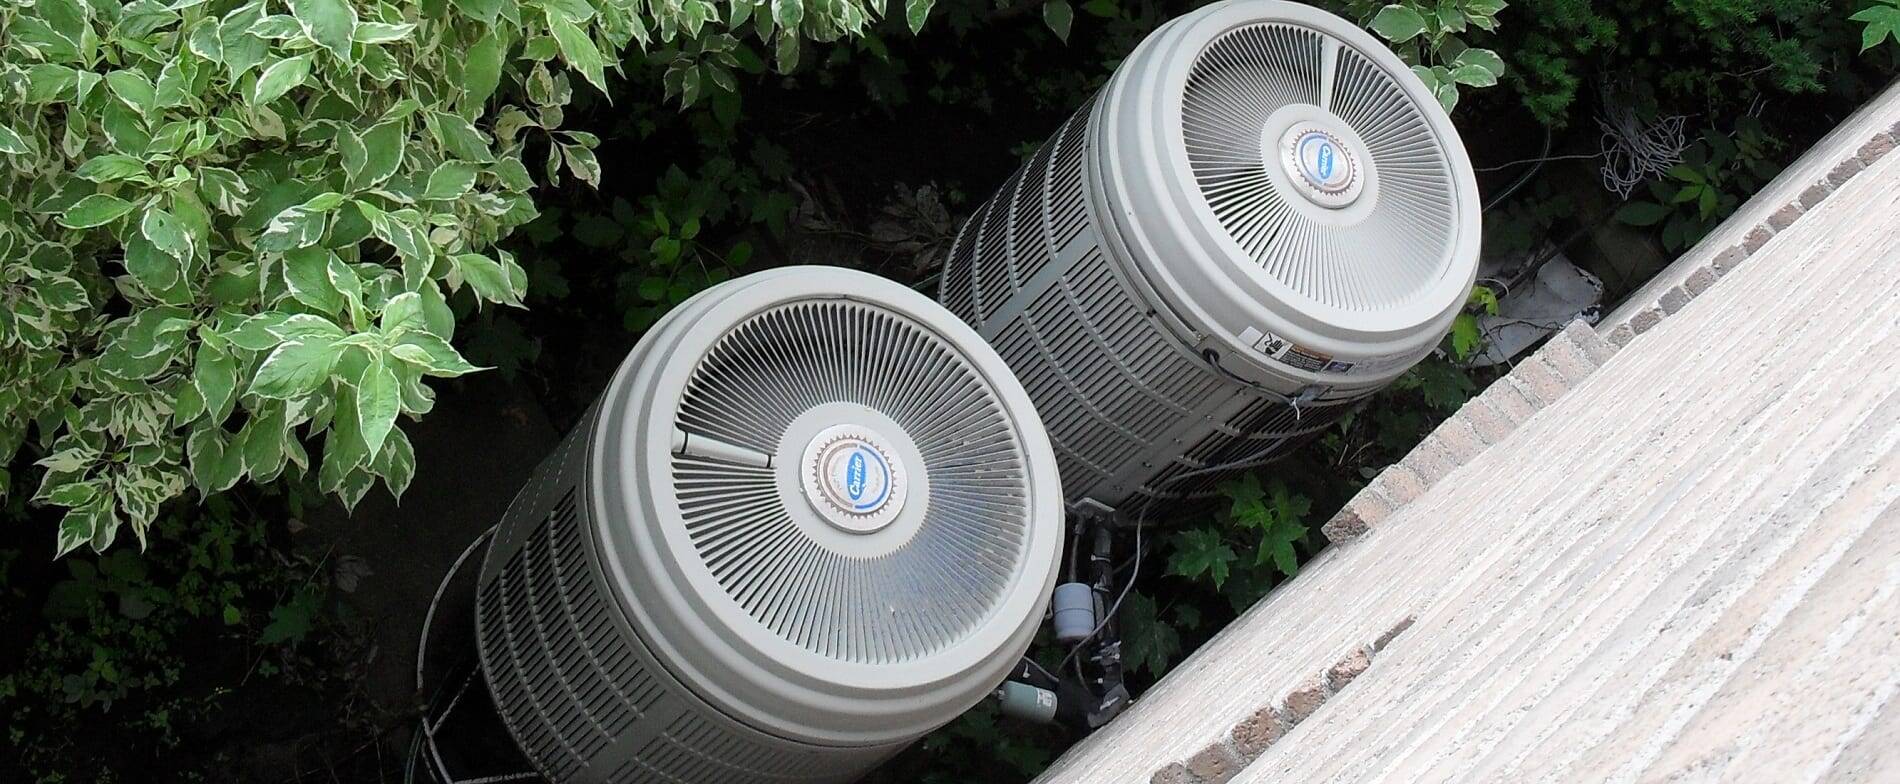 Government does not know exact number of heat pump installations